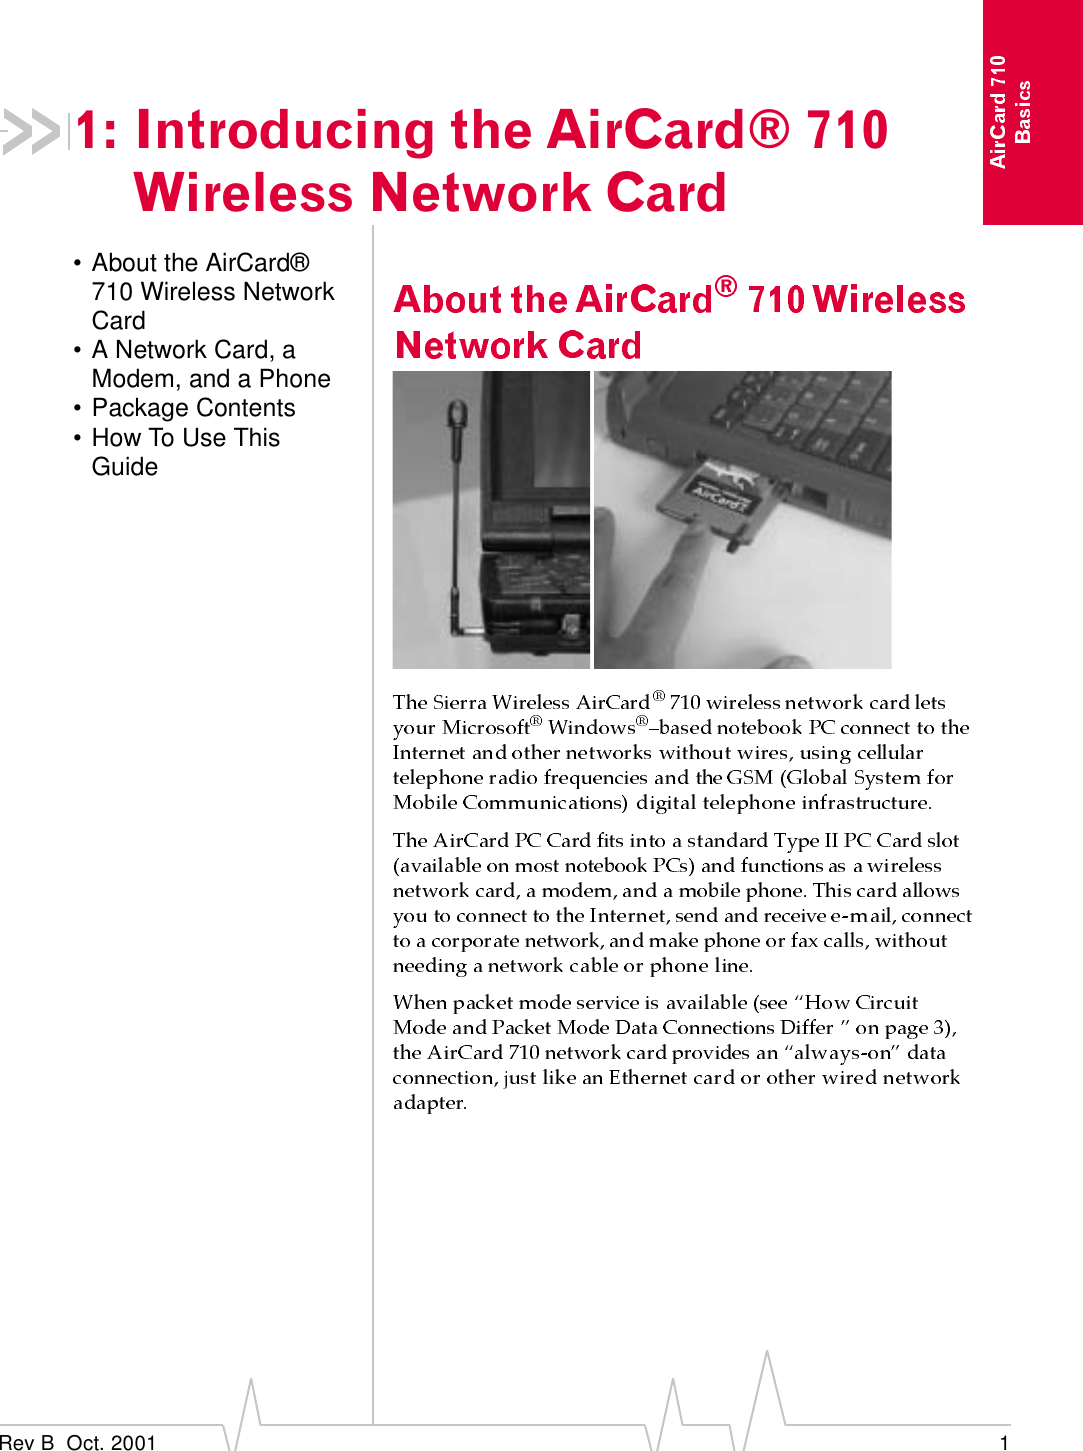 Rev B  Oct. 2001 11: Introducing the AirCard® 710 Wireless Network Card• About the AirCard® 710 Wireless Network Card• A Network Card, a Modem, and a Phone• Package Contents• How To Use This Guide